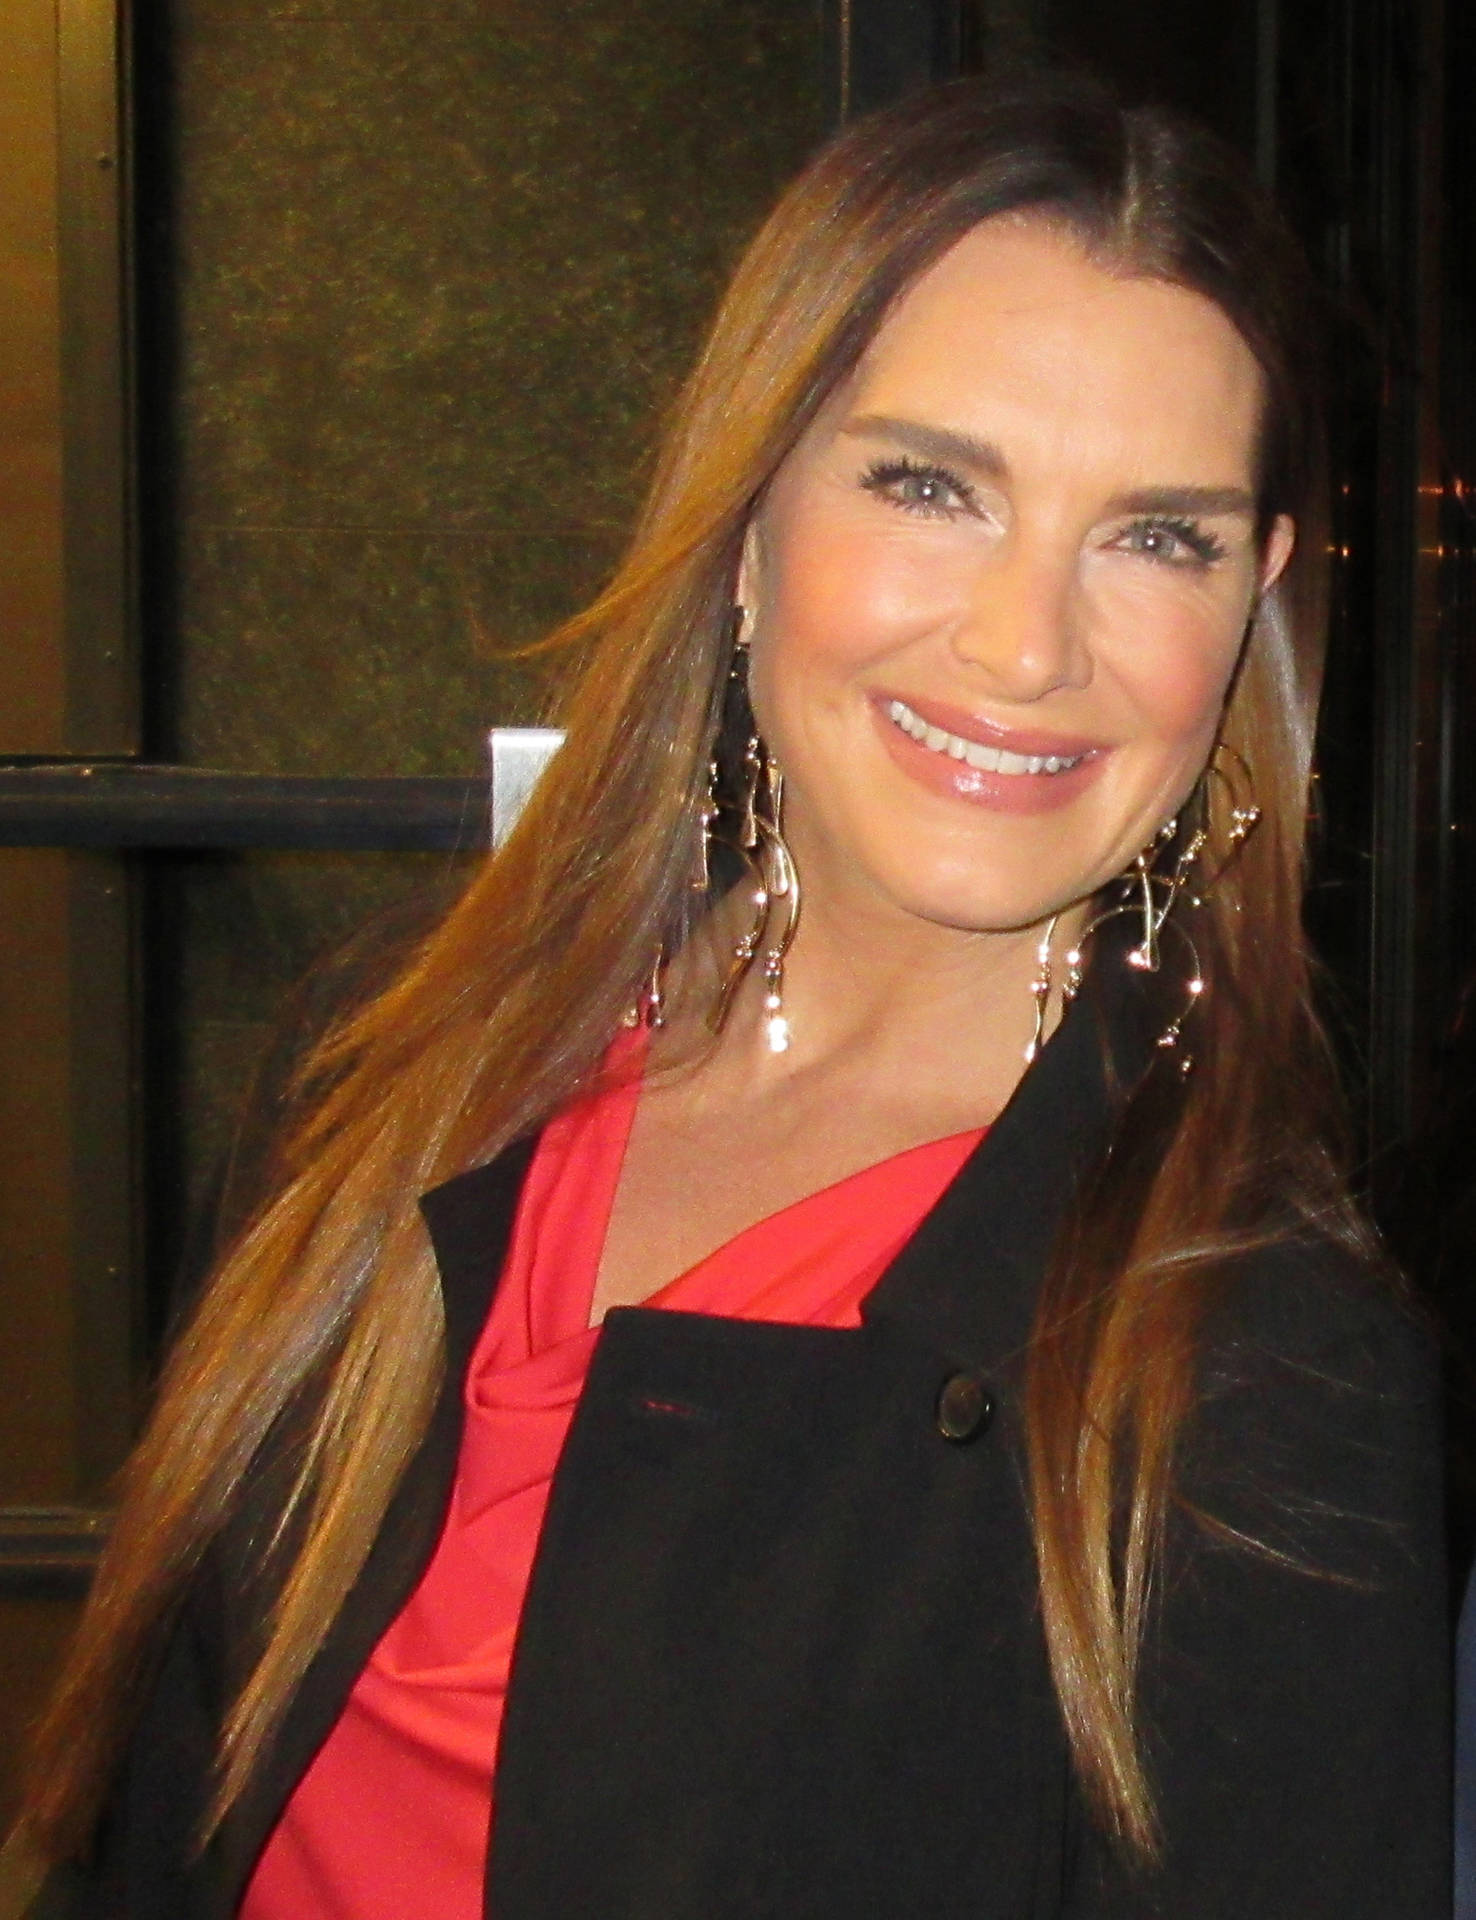 The ever-radiant Brooke Shields with her charming smile. Wallpaper